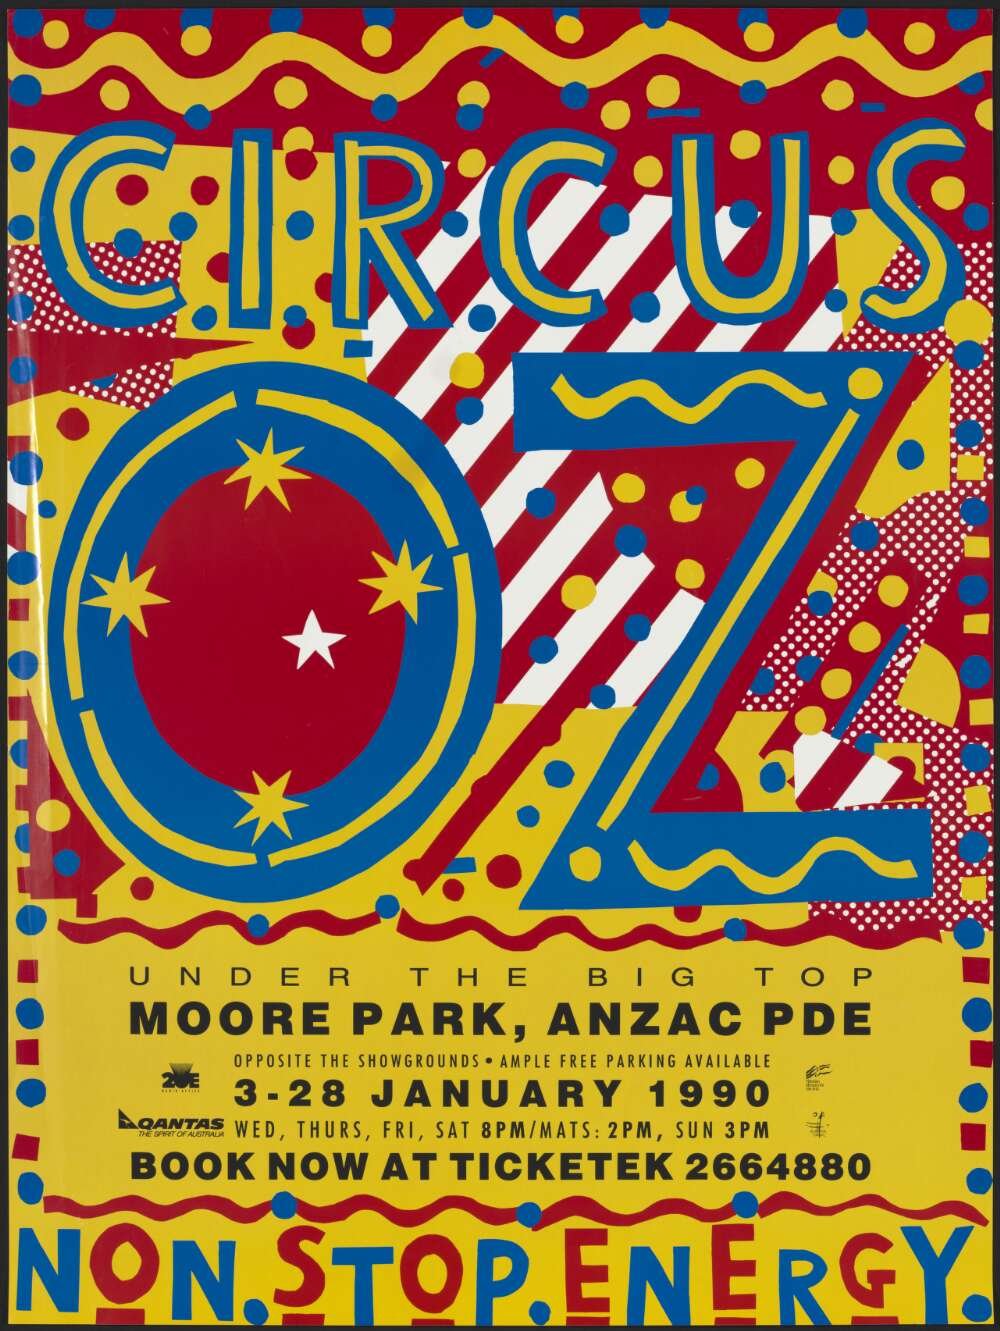 Brightly coloured poster for Circus Oz at Moore Park, Anzac Pde. Text at the bottom reads "NON. STOP. ENERGY."